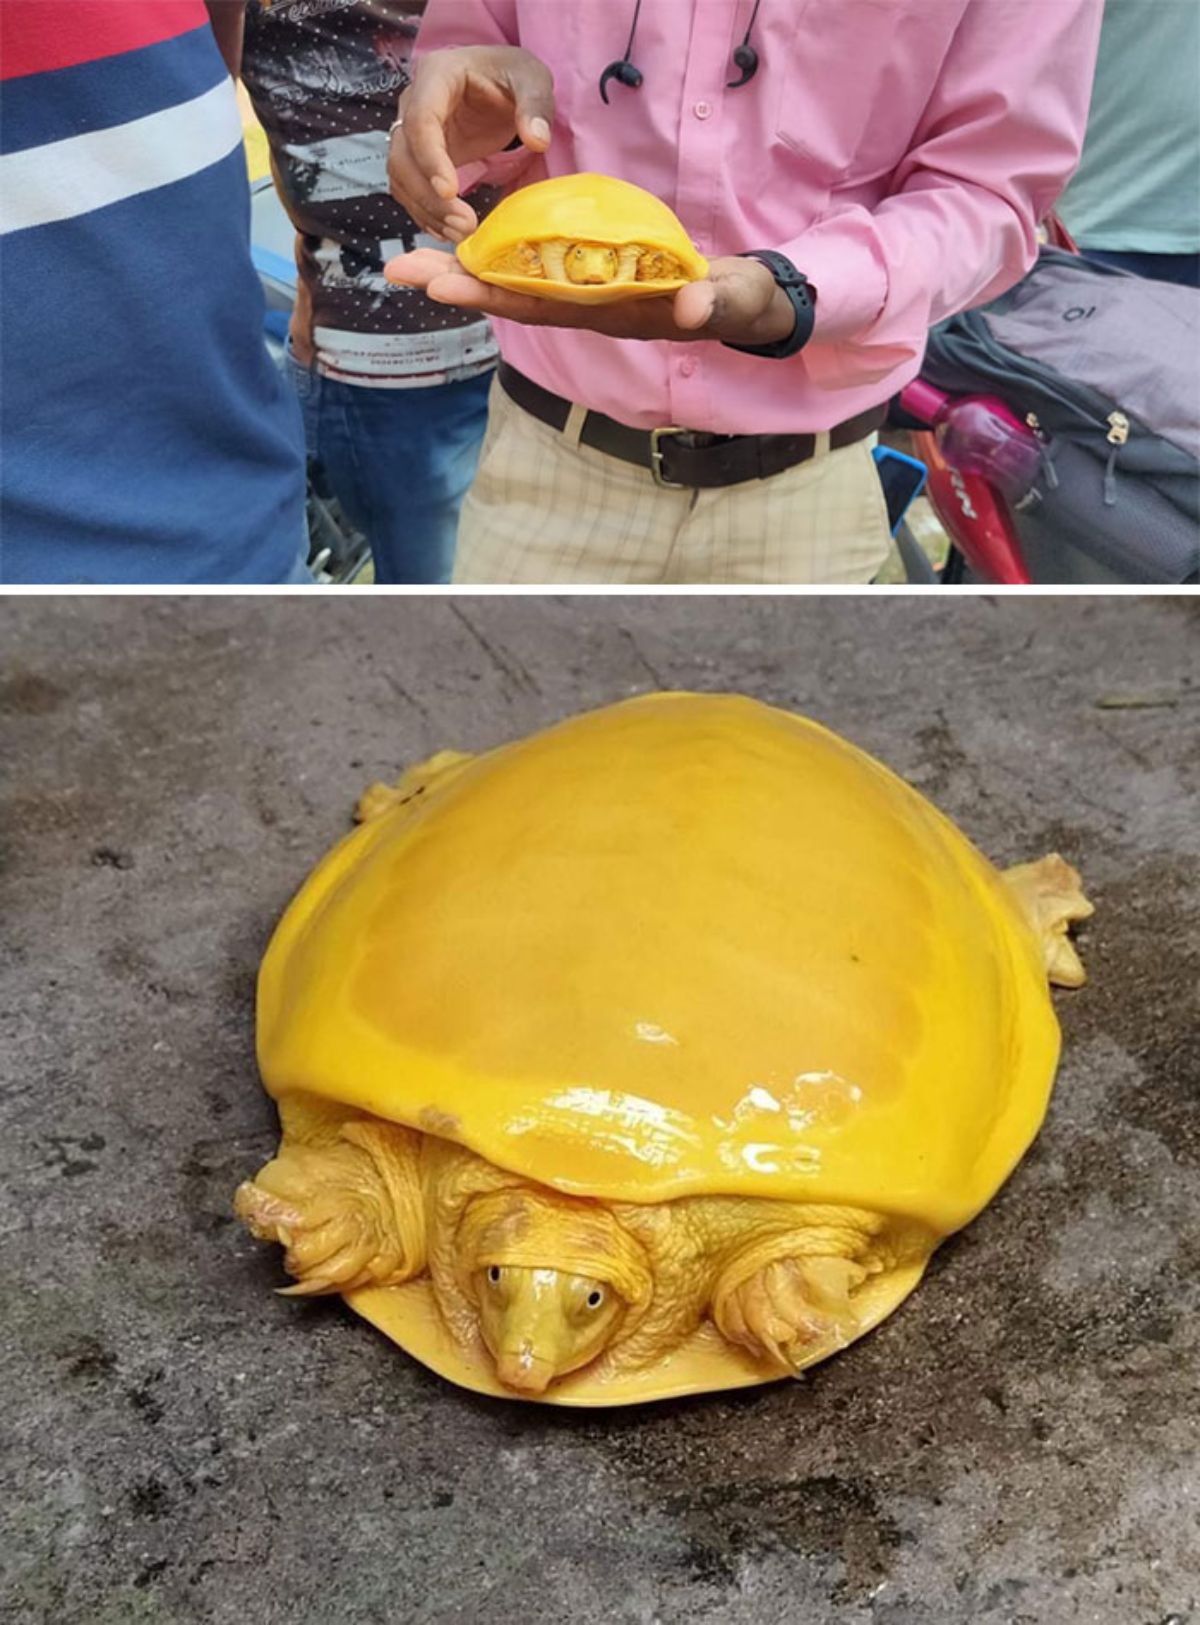 2 photos of a albino turtle that is yellow in colour